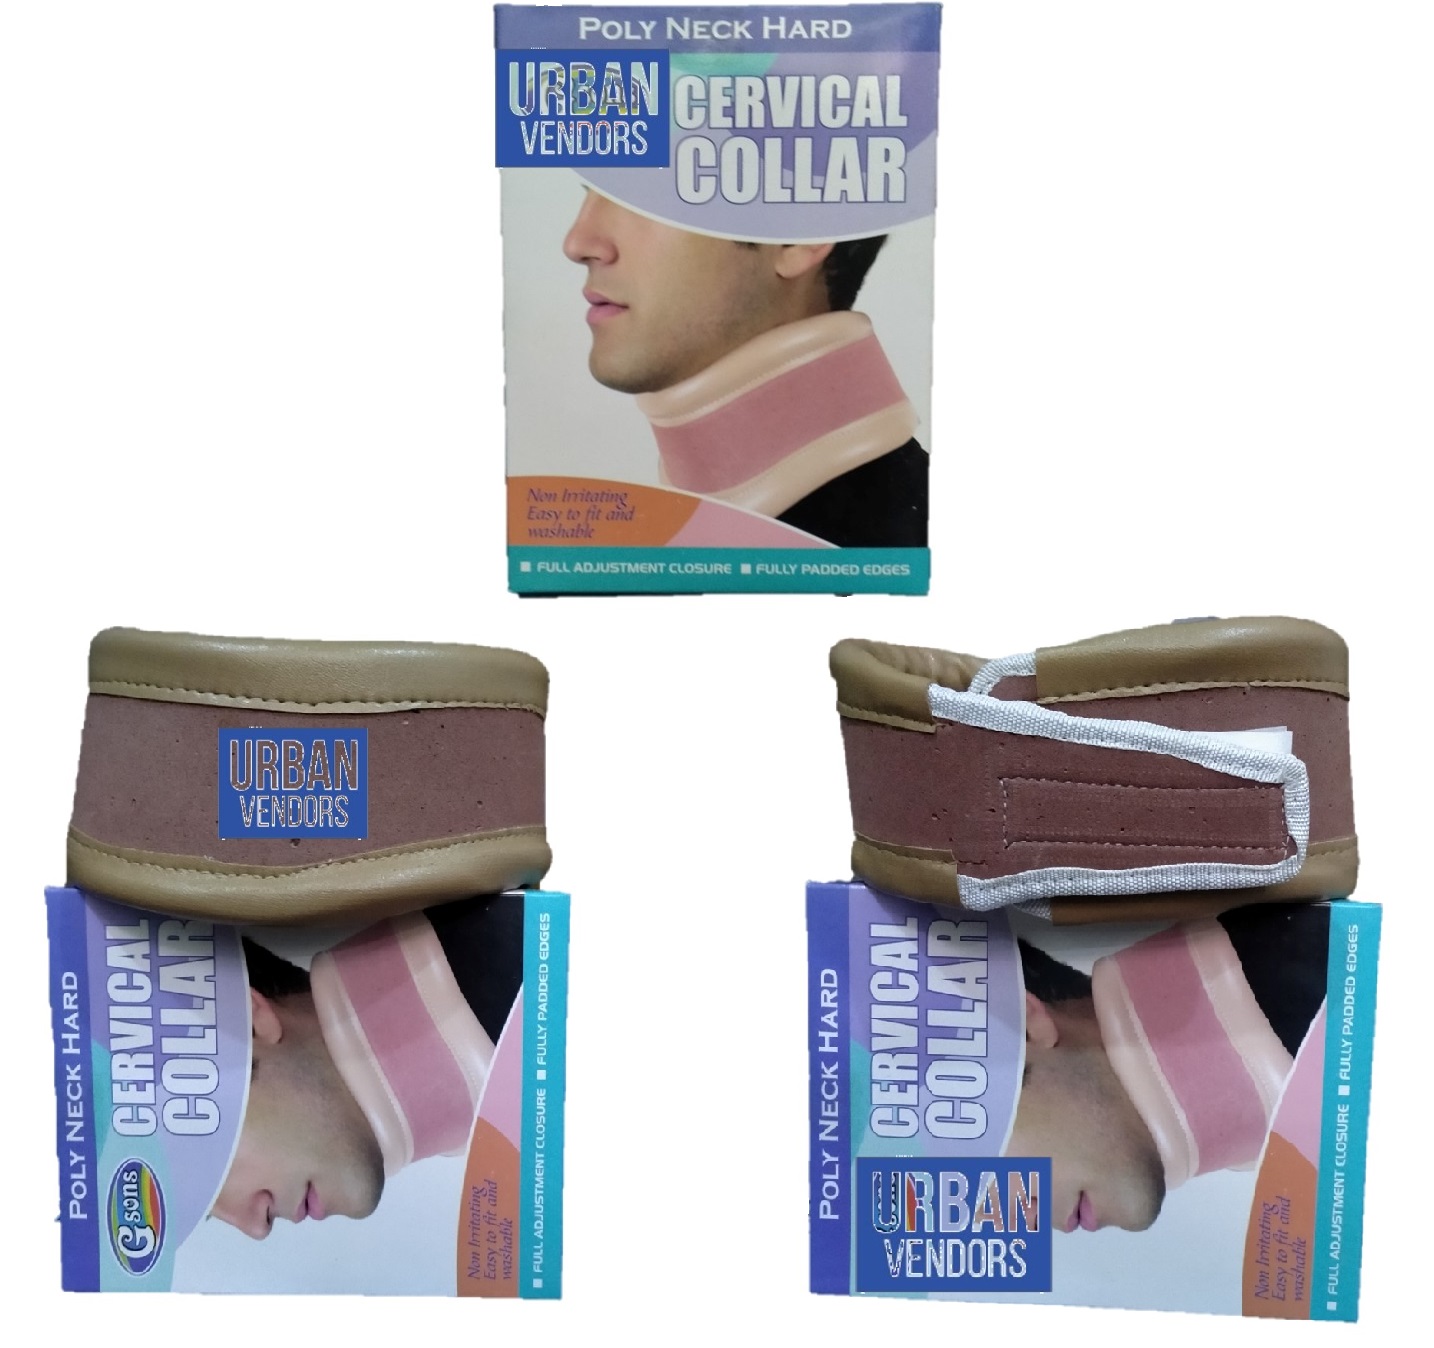 Soft Cervical Collar - Buy Best Physiotherapy Equipment Suppliers In  Pakistan, At  Free Delivery